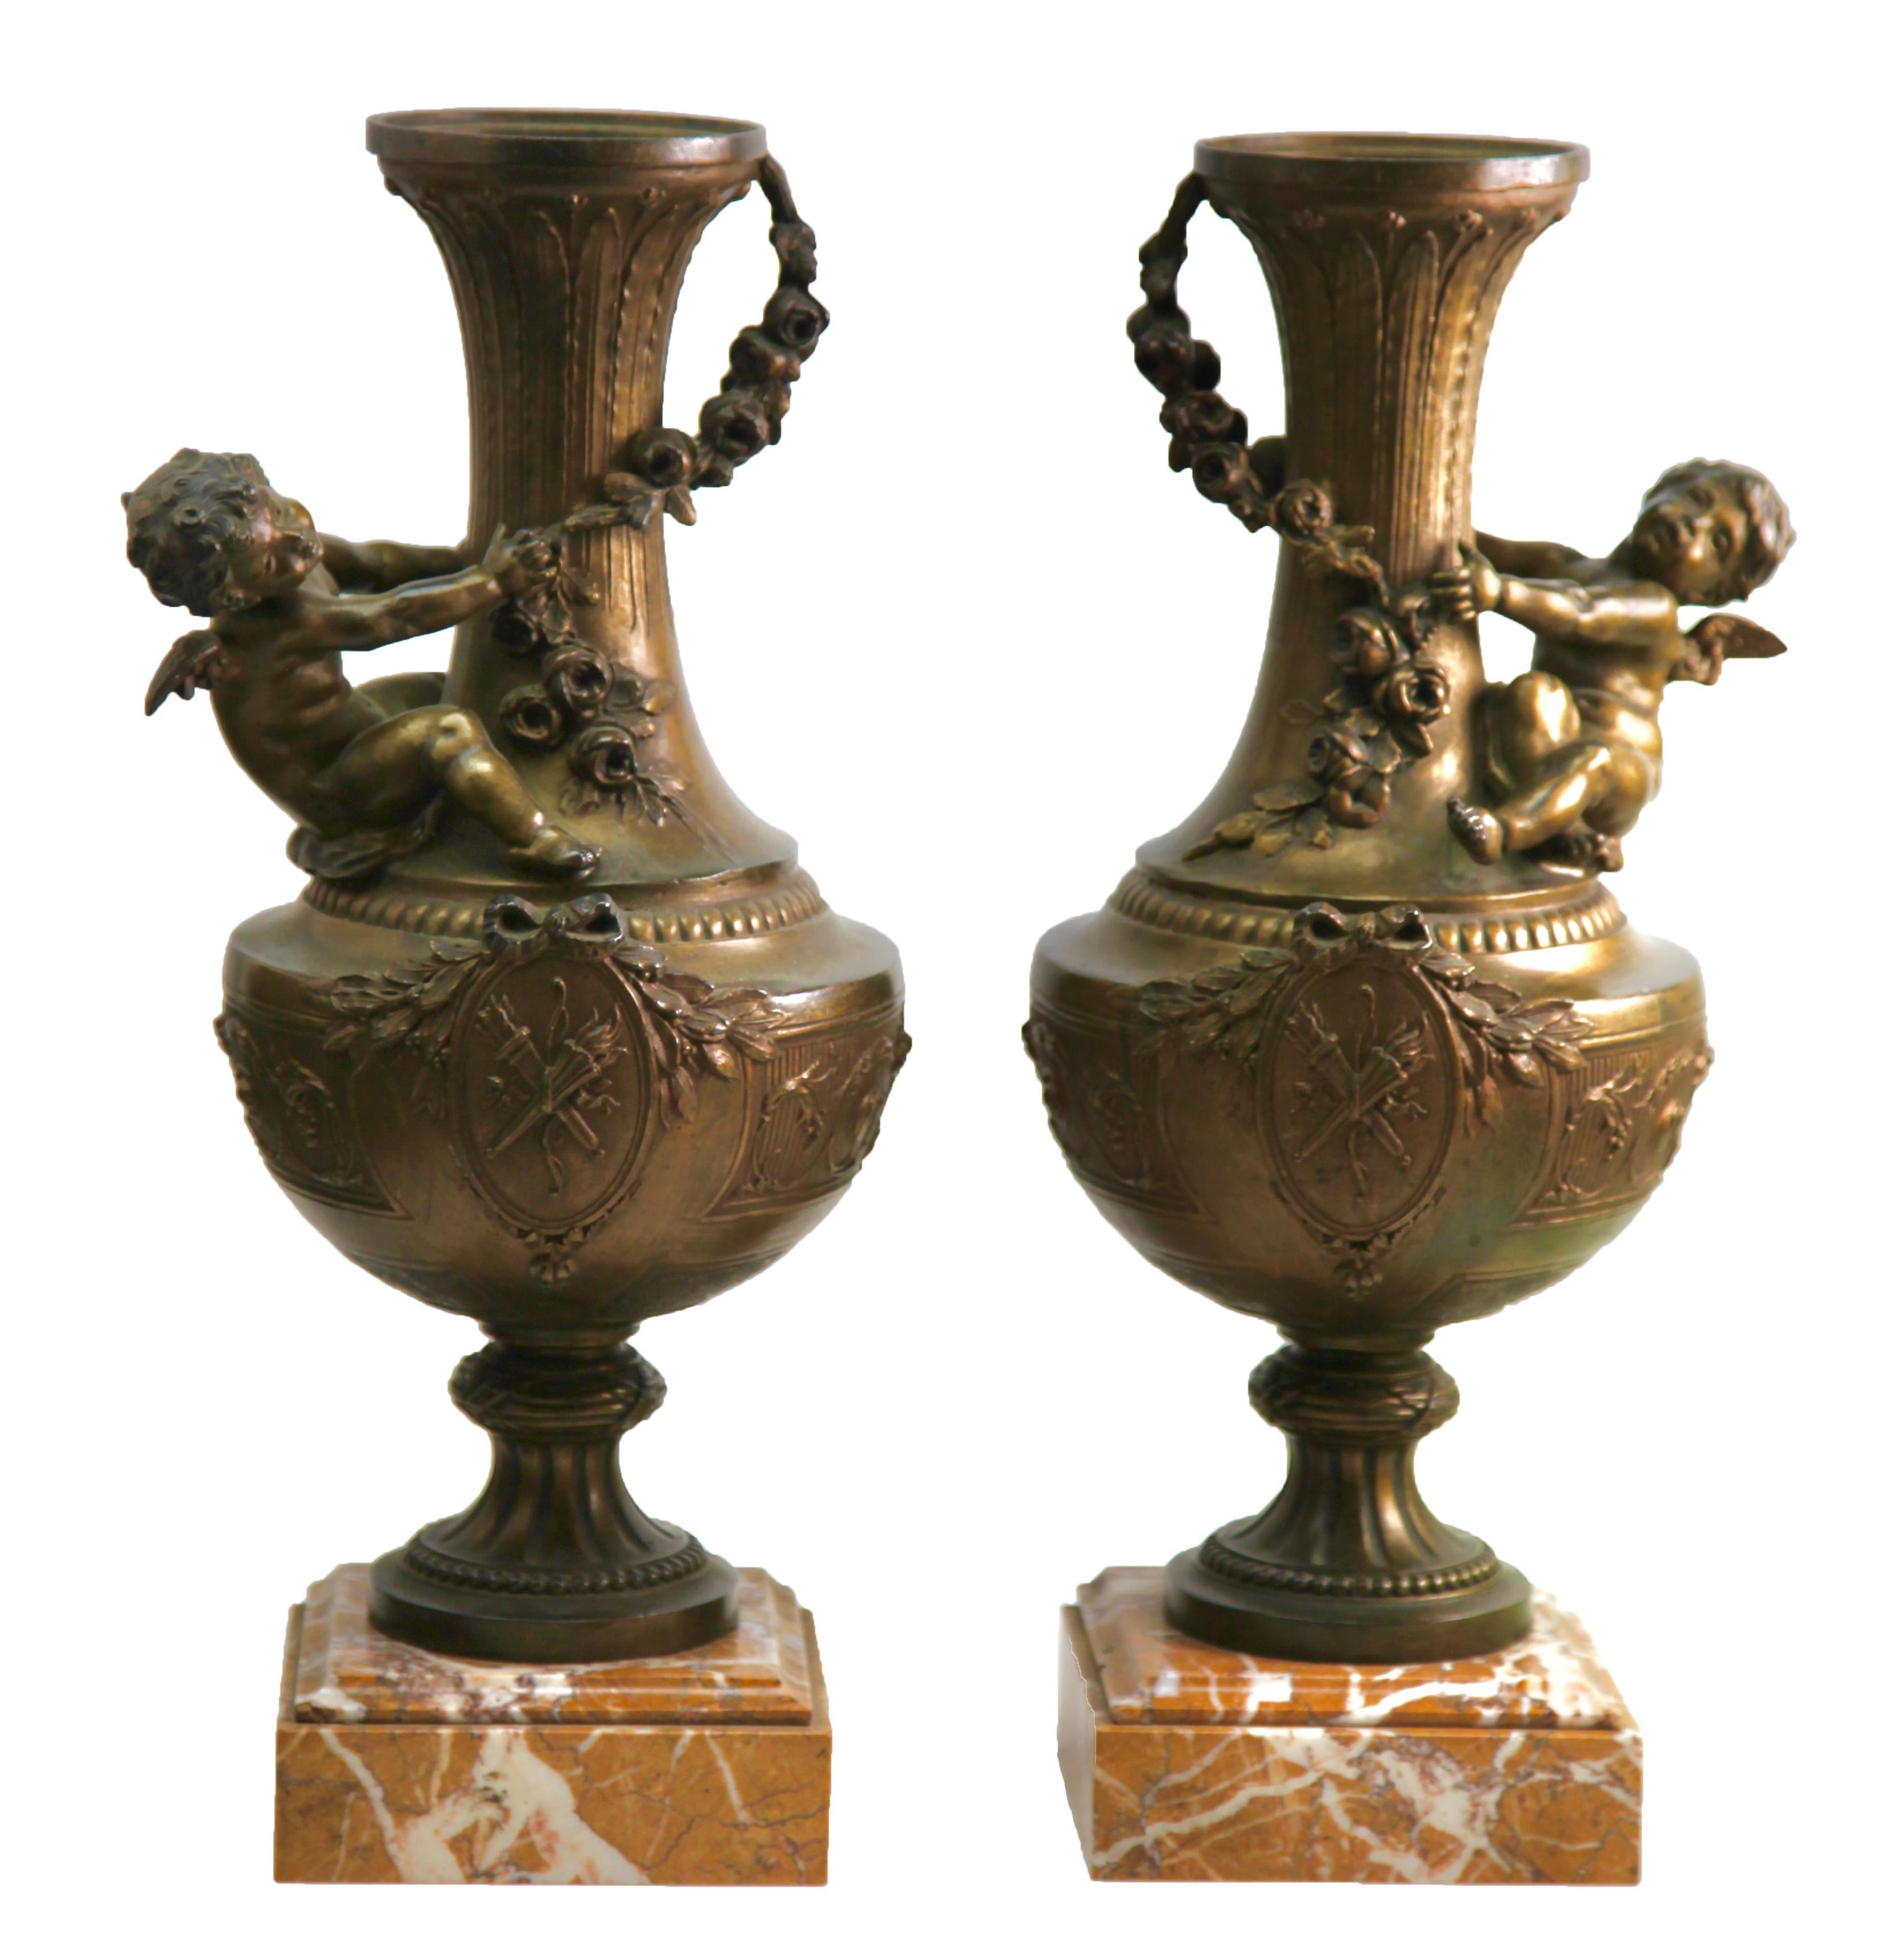 Pair of Ornamented Vases or Lamps with Little Angels and Richly Decorated For Sale 4